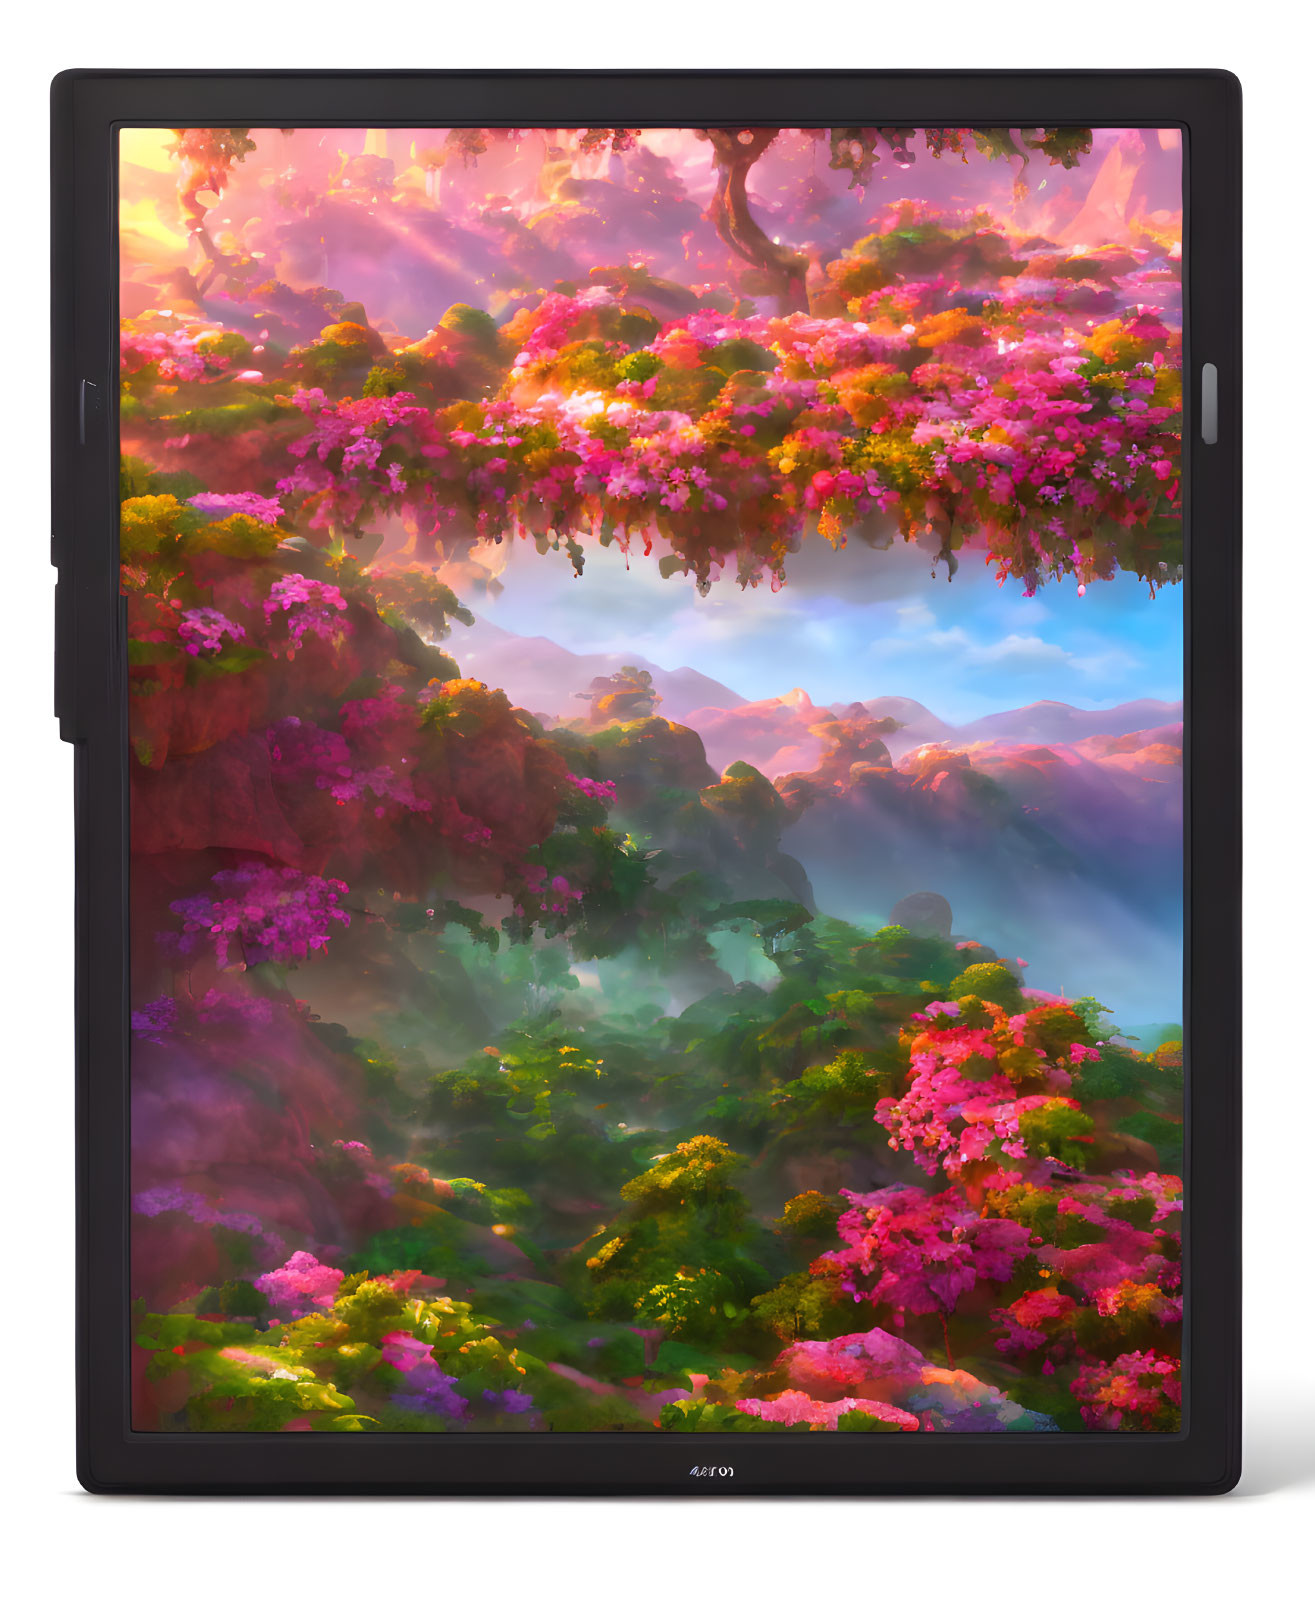 Colorful digital illustration: lush, pink flowering trees, misty mountains, and warm sky on tablet